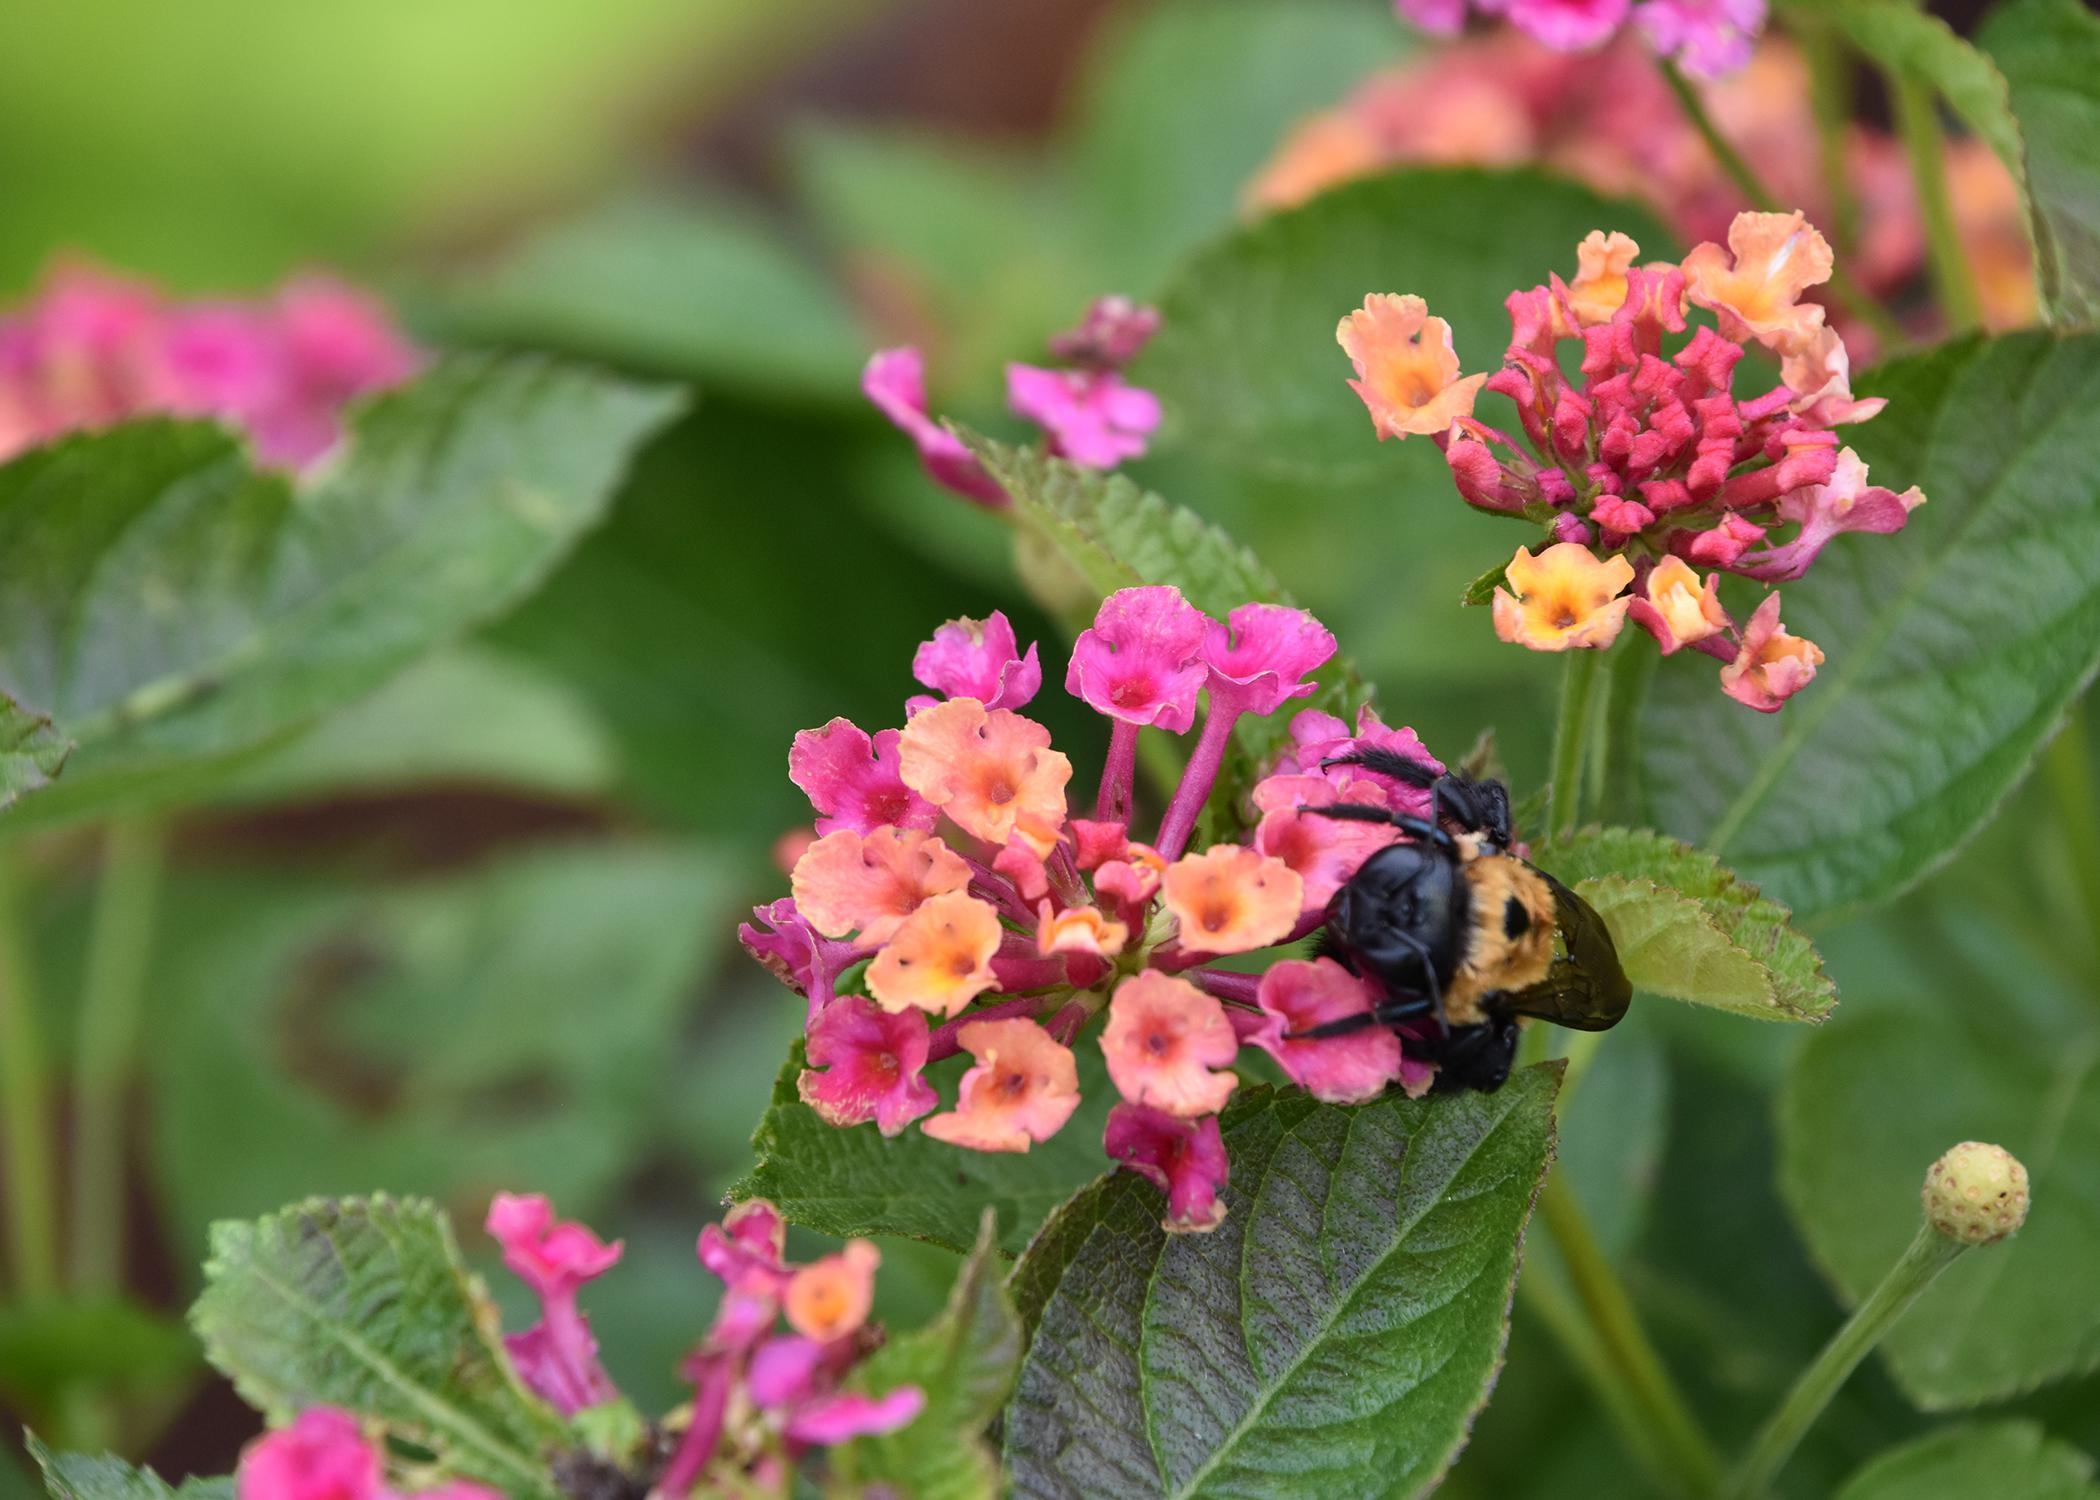 A bumblebee climbs on a single, pink-and-orange cluster of blooms.